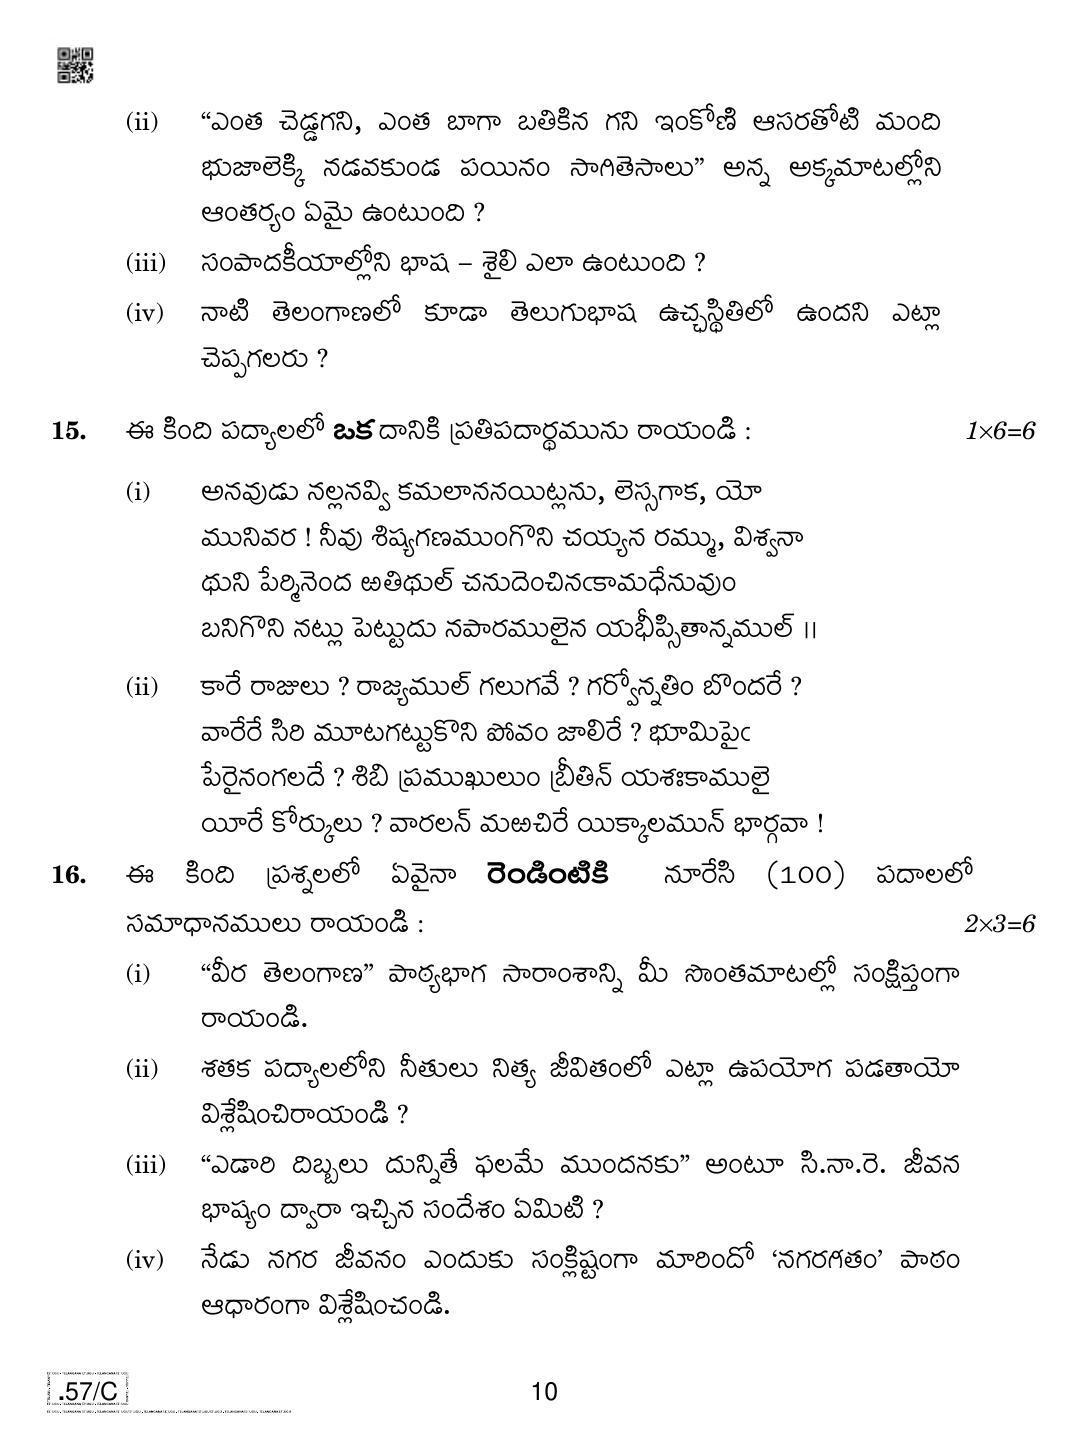 CBSE Class 10 Telug Telangana 2020 Compartment Question Paper - Page 10